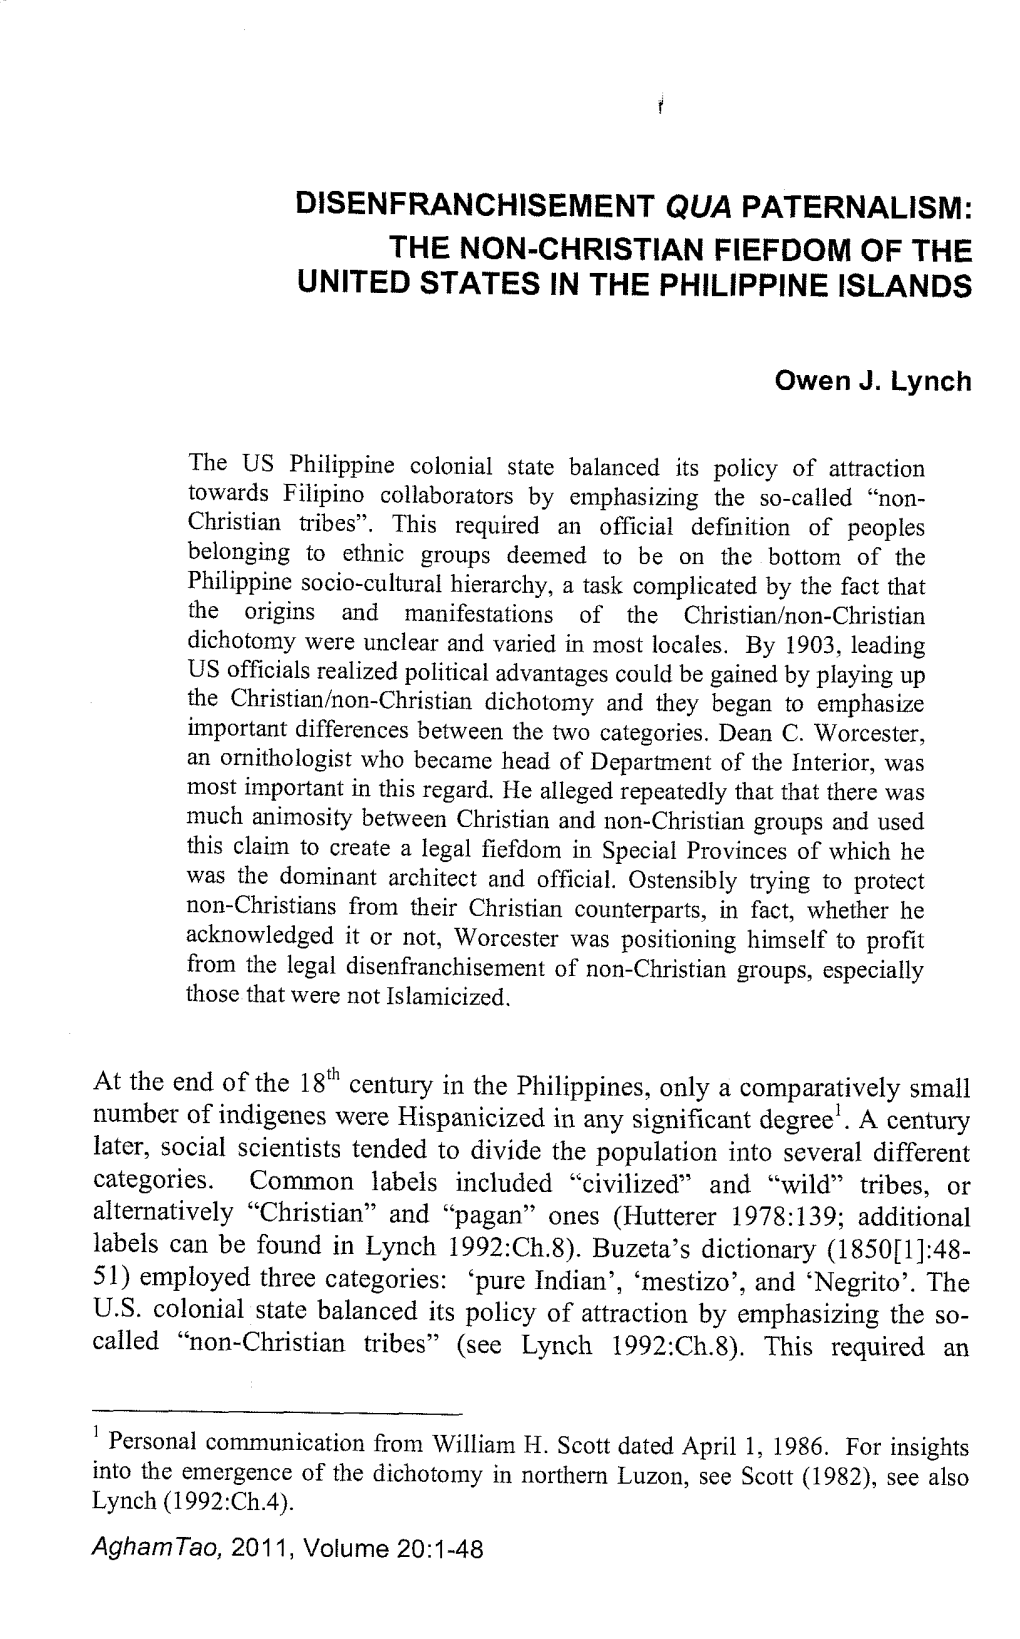 The Non-Christian Fiefdom of the United States in the Philippine Islands